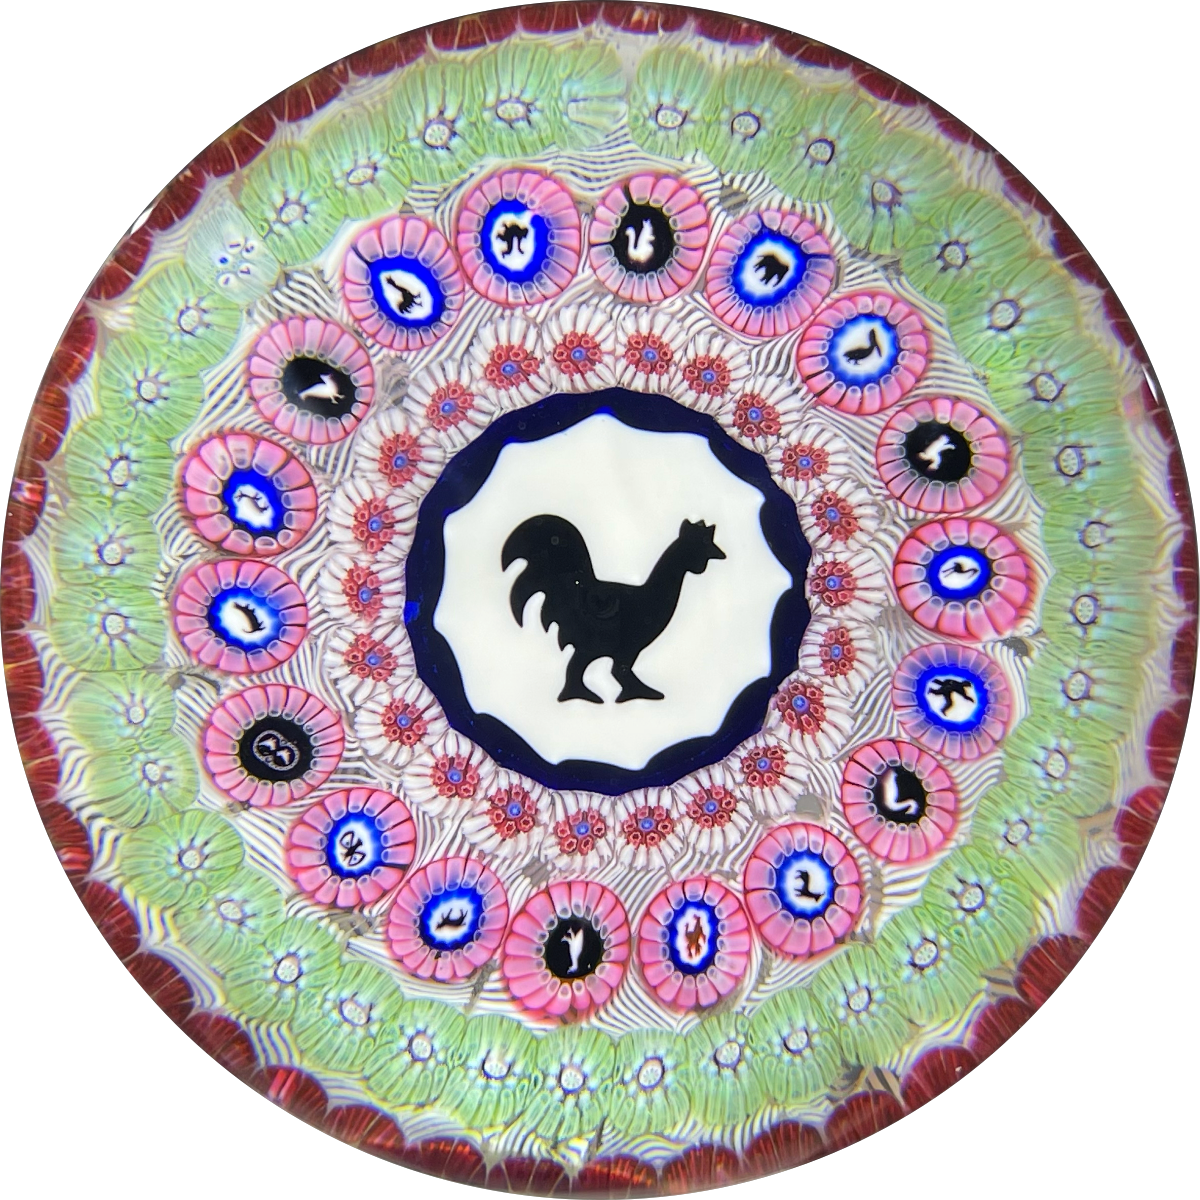 Baccarat 1971 LE Coq Noir Concentric Complex Millefiori & Silhouette Murrine with Large Rooster Gridel Cane